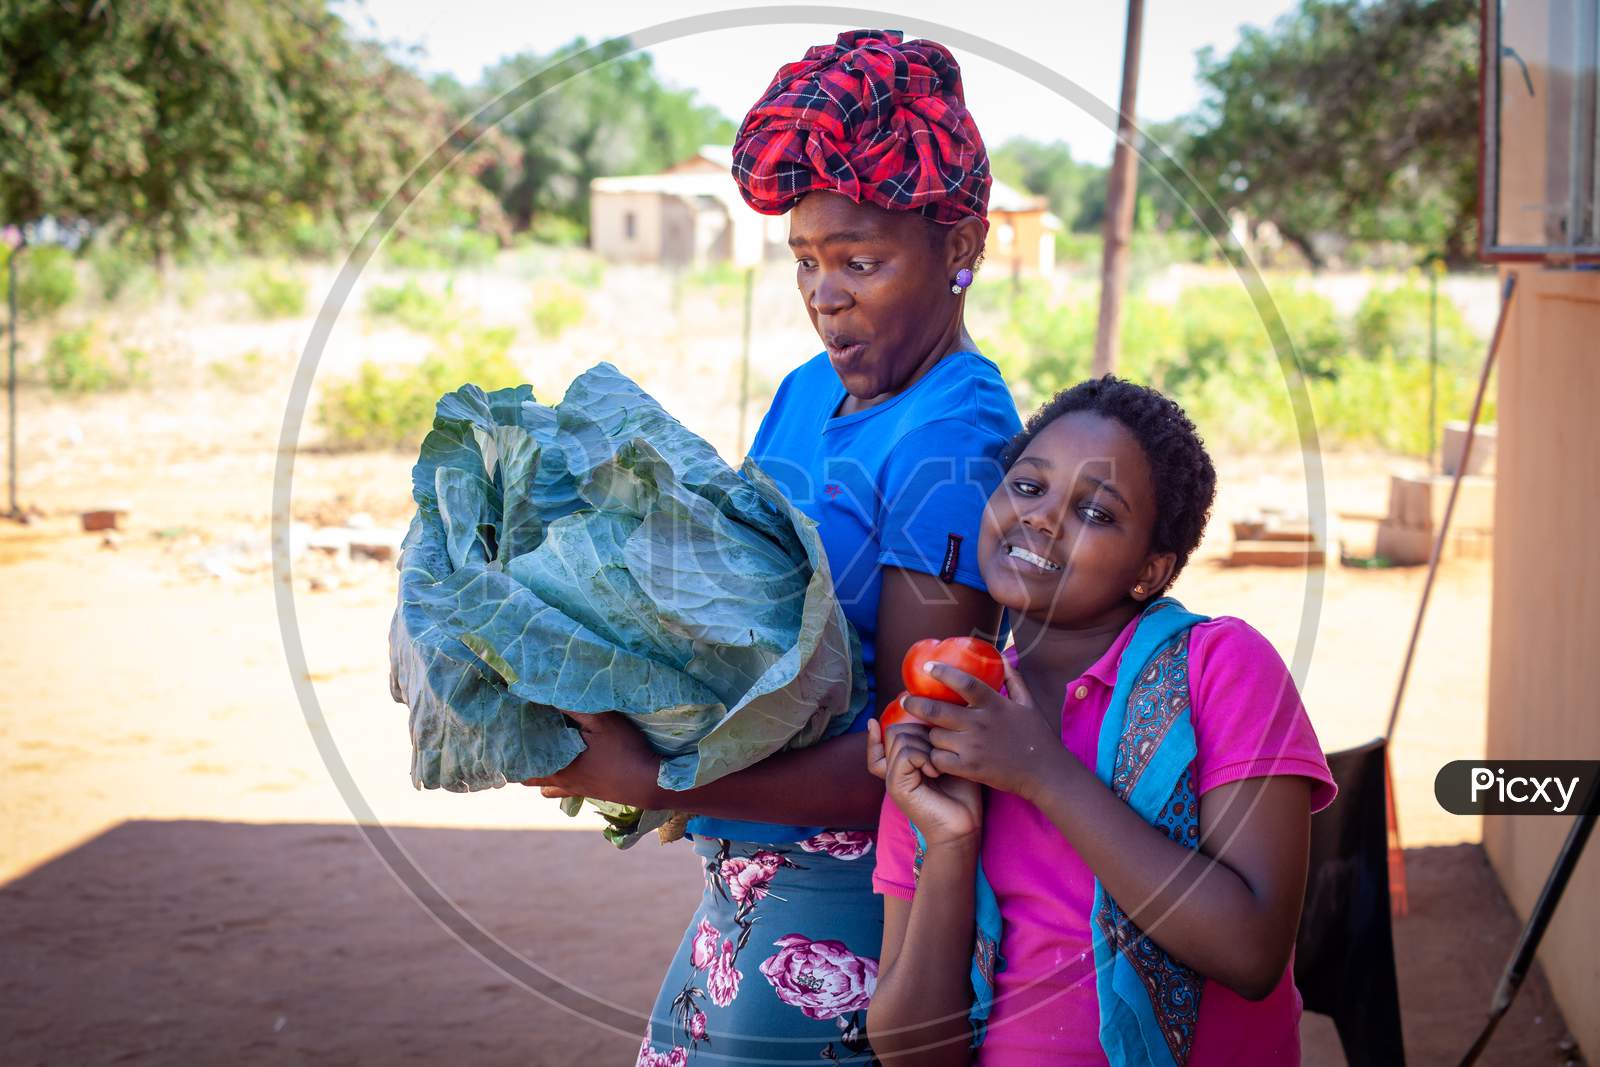 An African Woman With Children Holding A Cabbage And Tomatoes